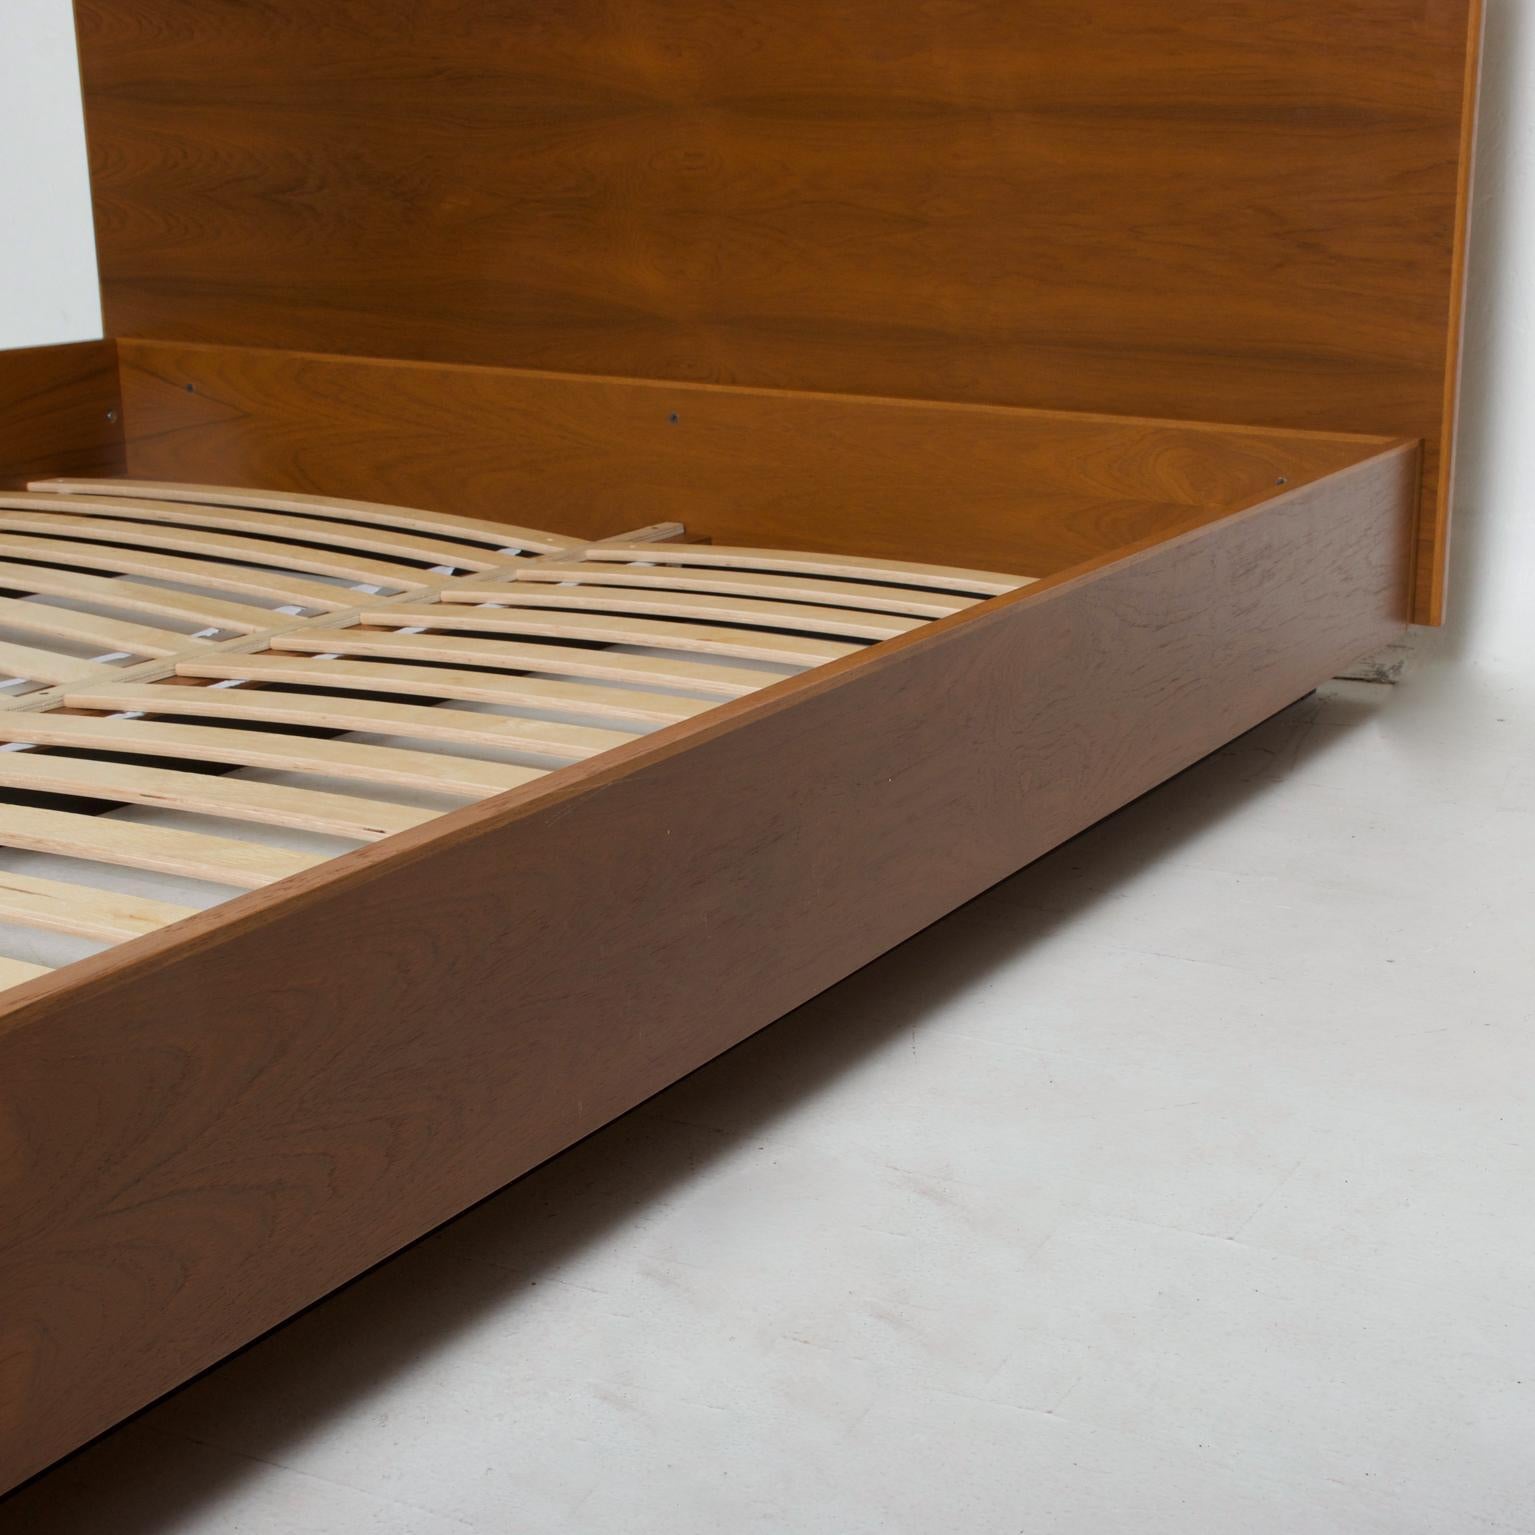 For your consideration, a modern teak platform bedframe queen size, danish Mid-Century Modern inspired.

Bed in new and made to order, please allow 8-10 weeks to produce.

Proudly made in the USA, designed by Pablo Romo. All custom beds are uniquely